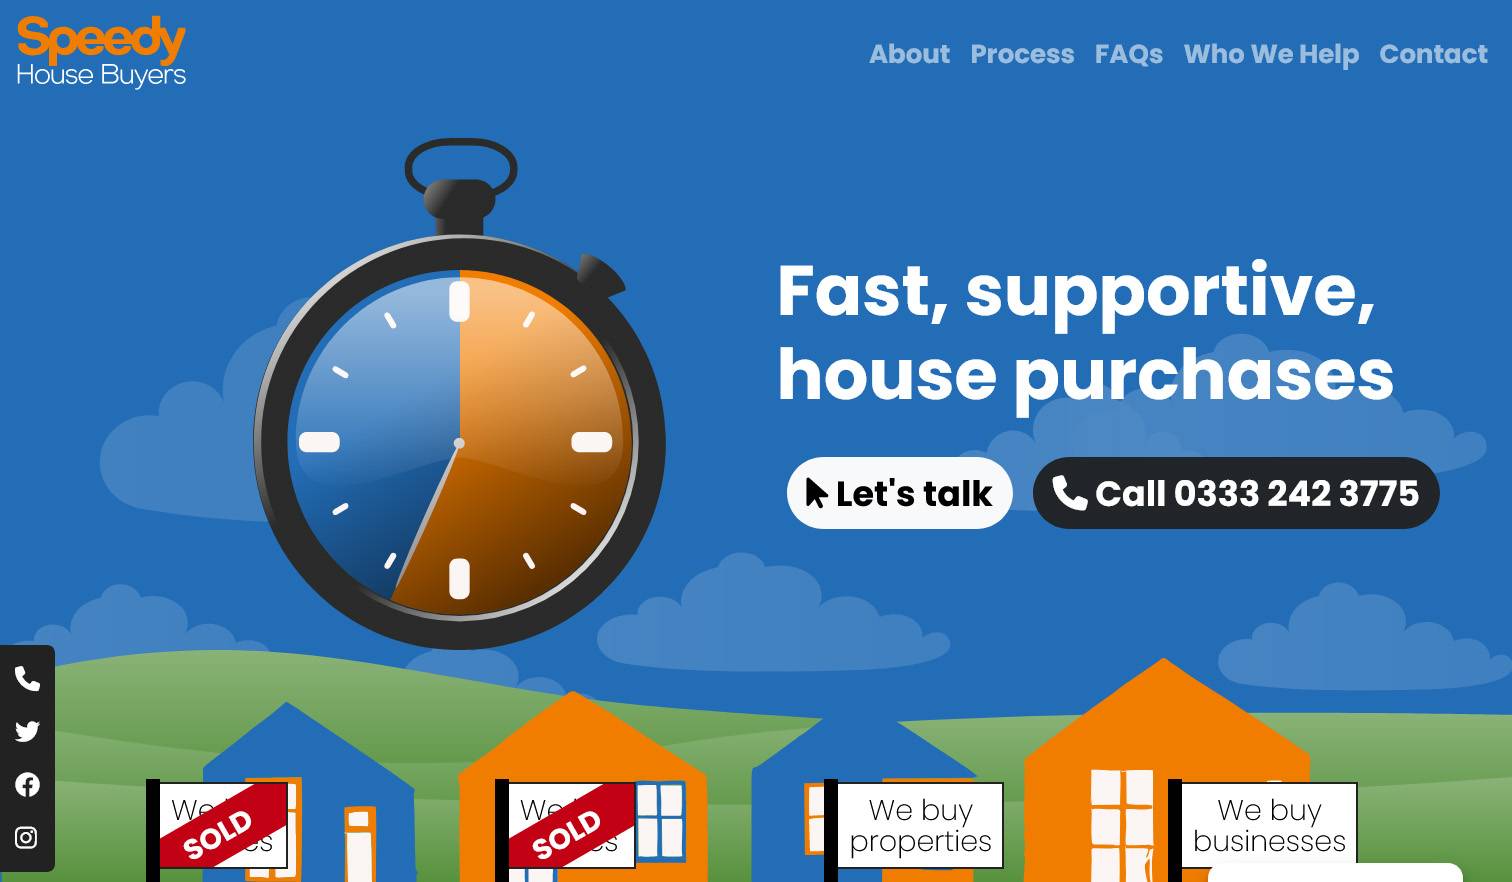 Fast supportive house purchases Speedy House Buyers screenshot